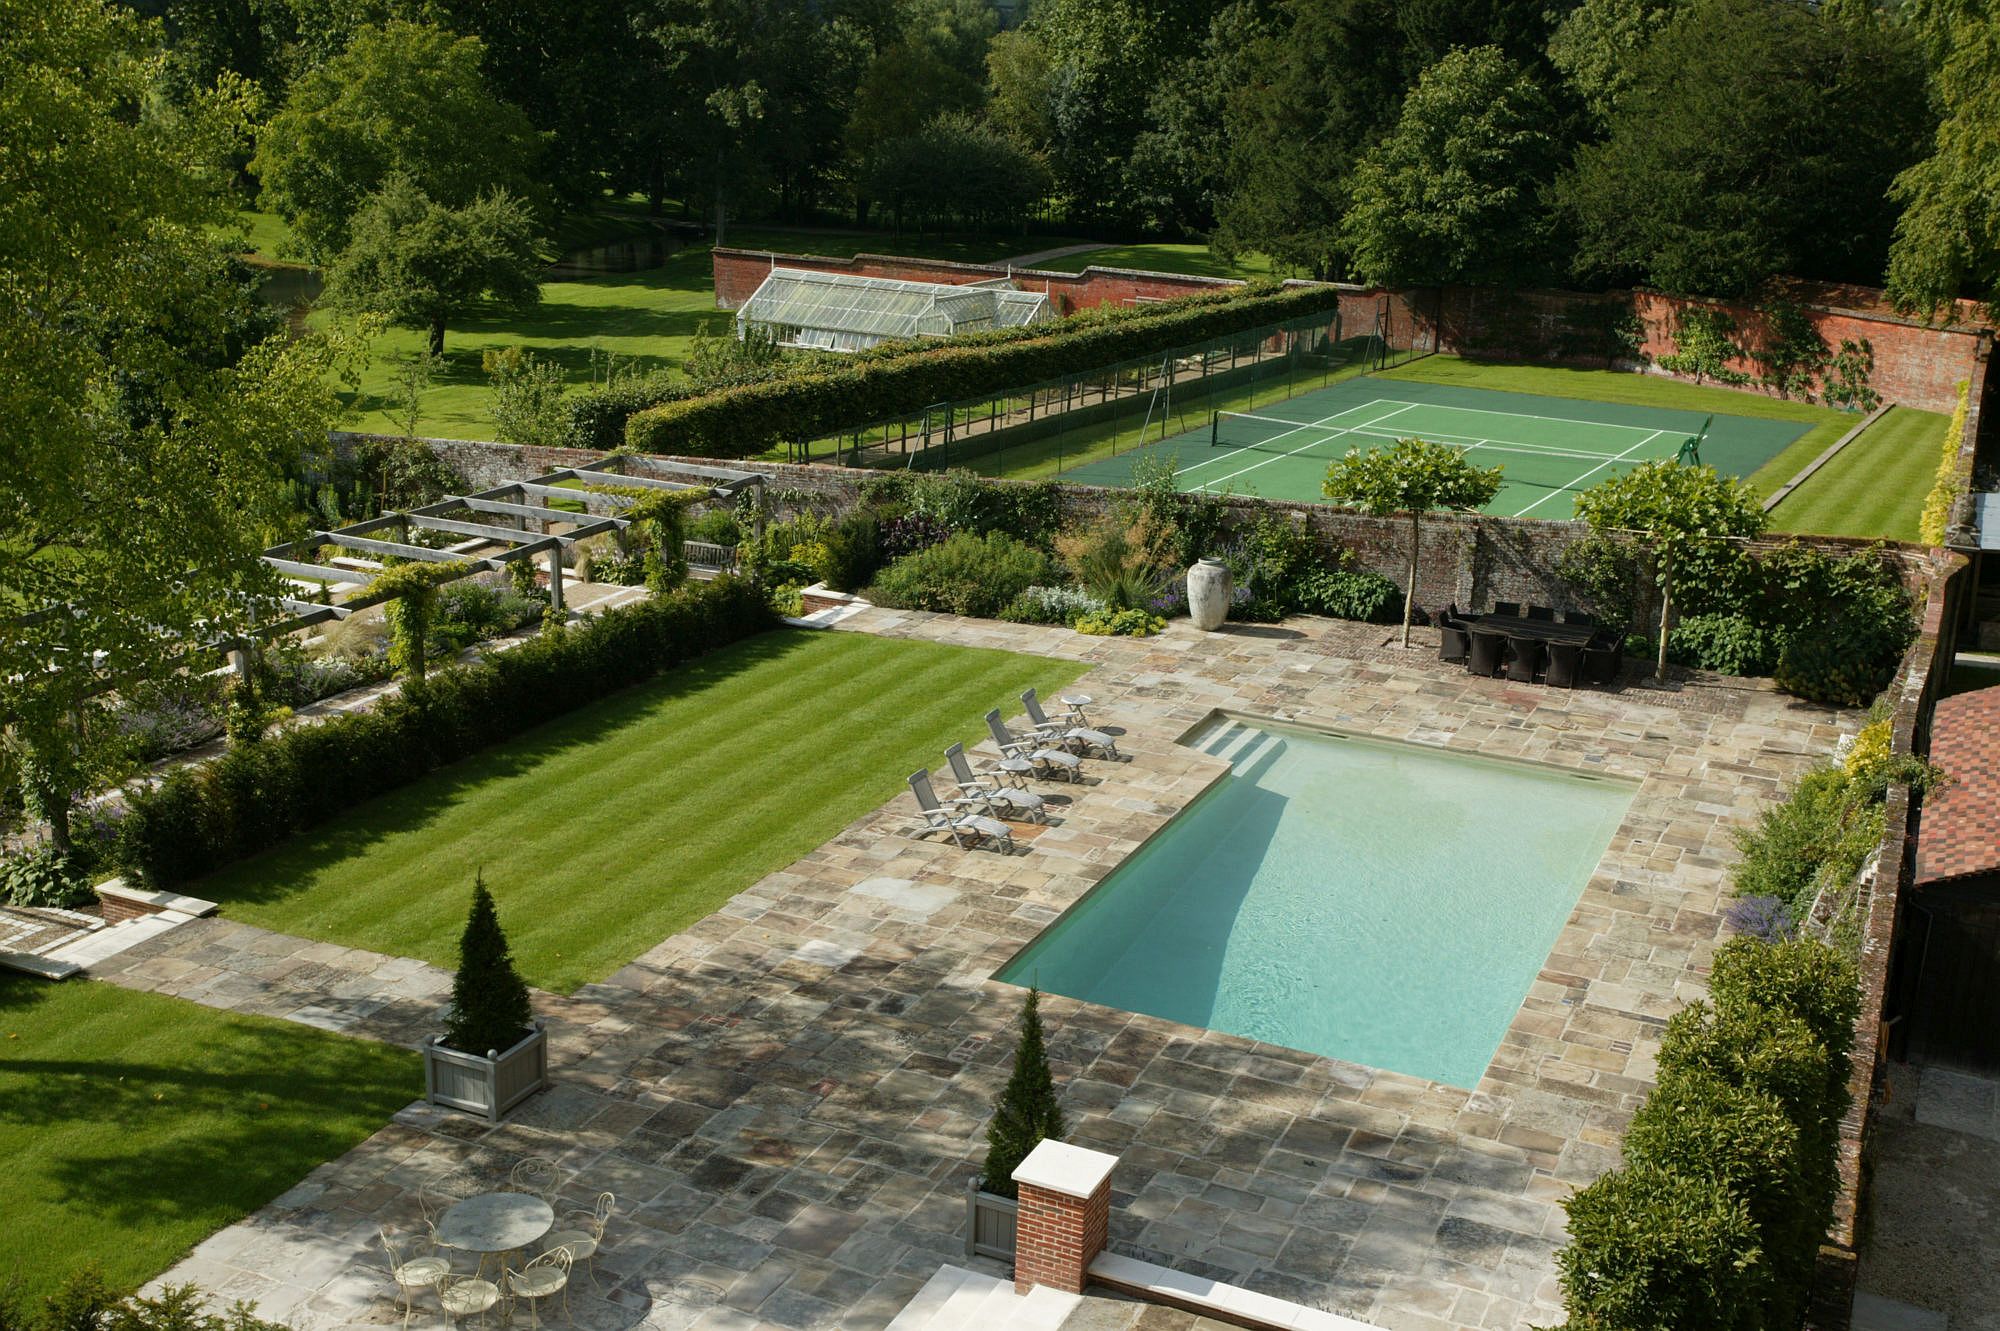 Tennis court and swimming pool are a part of the expansive gardens around the Manor House